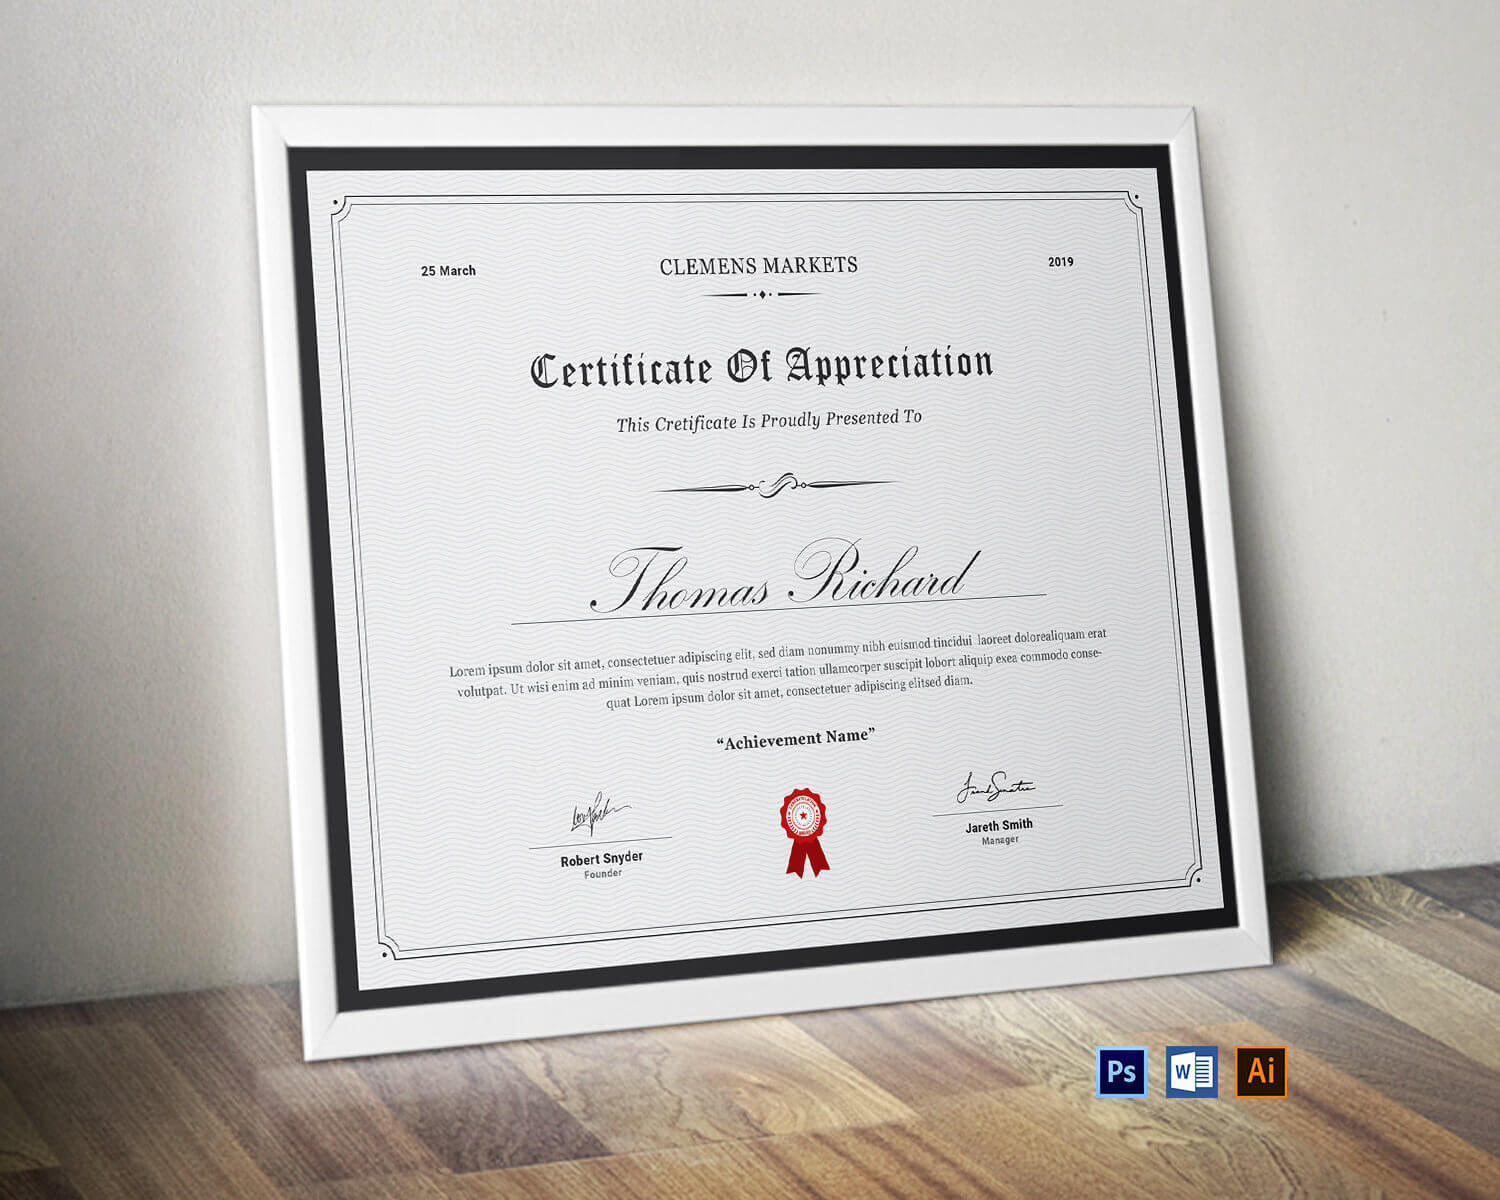 Certificate Template | Printable Award Certificate | Clean Certificates |  Simple Design | Editable Ms Word | Certificate Of Achievement For Microsoft Office Certificate Templates Free